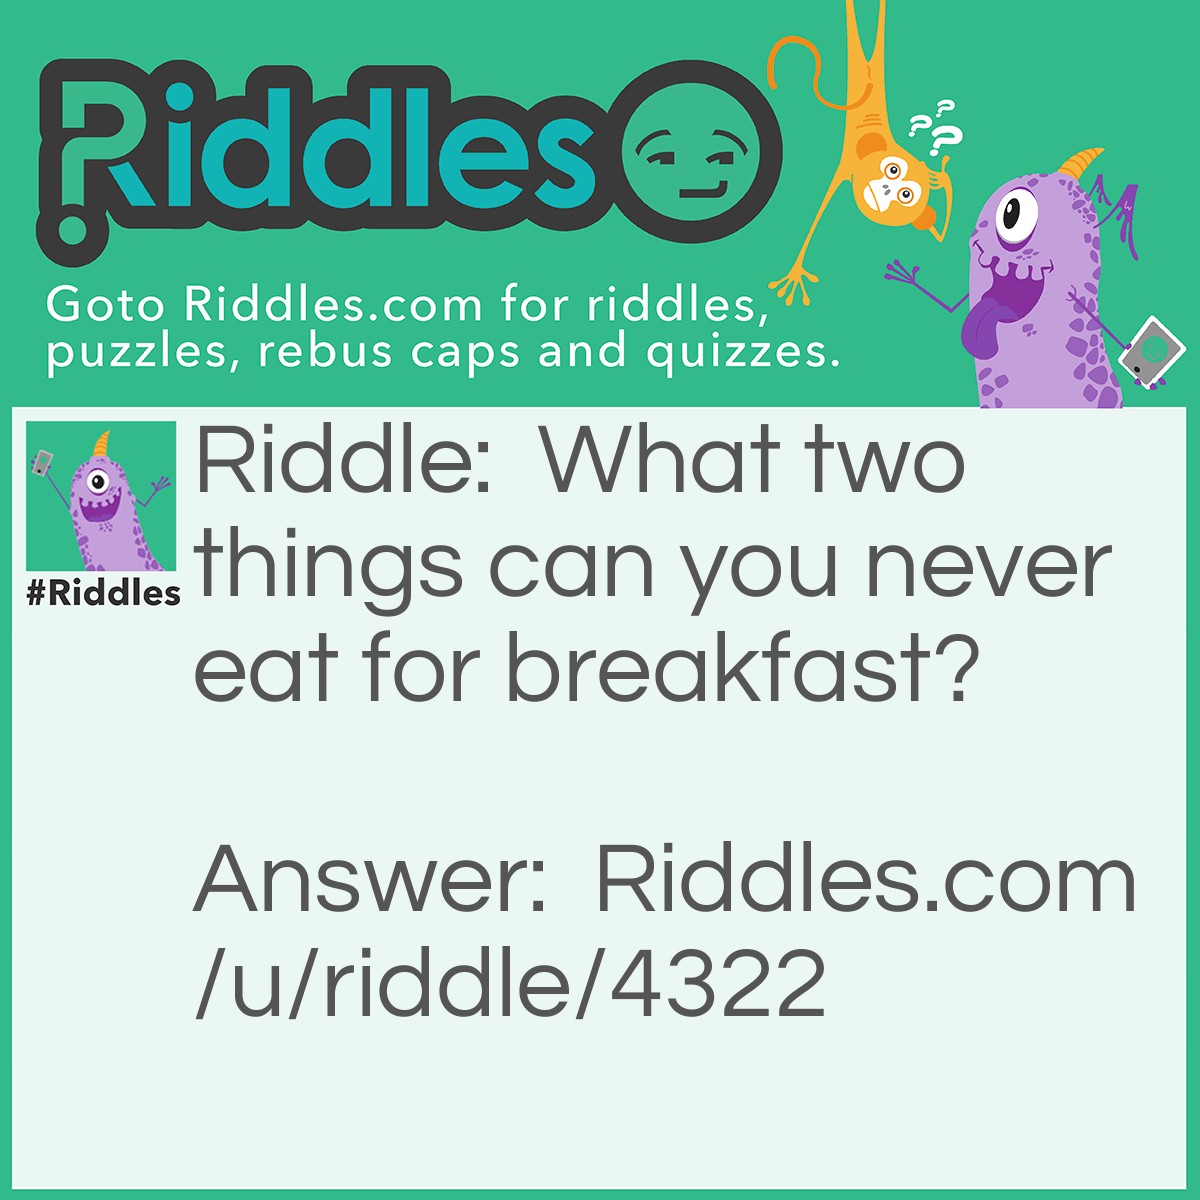 Riddle: What two things can you never eat for breakfast? Answer: Lunch and Dinner.